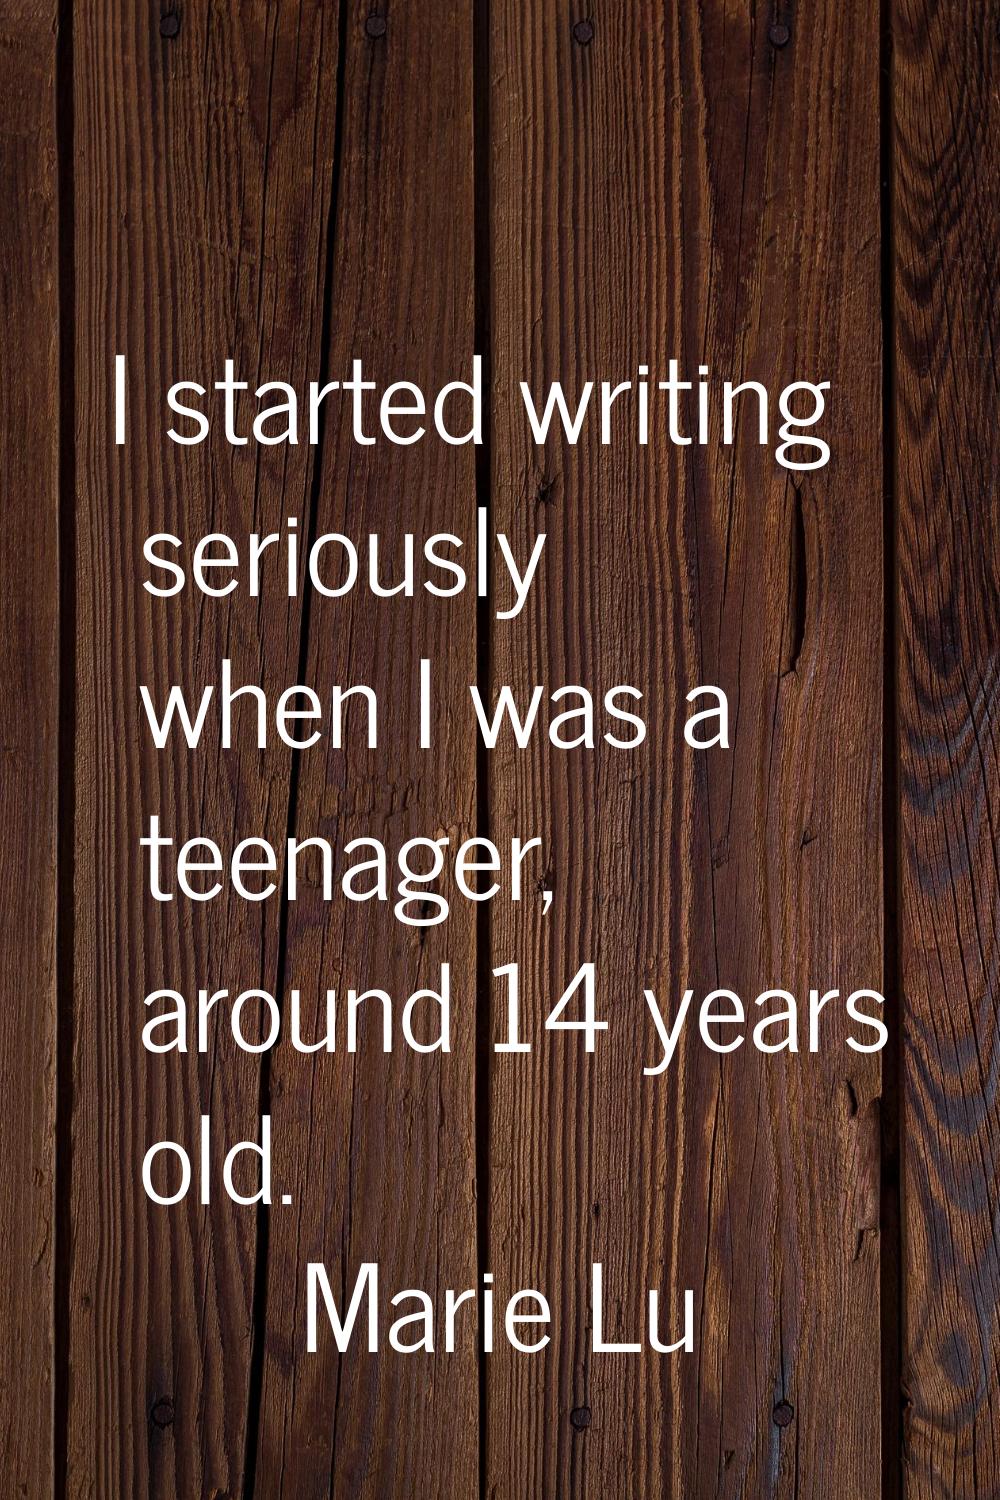 I started writing seriously when I was a teenager, around 14 years old.